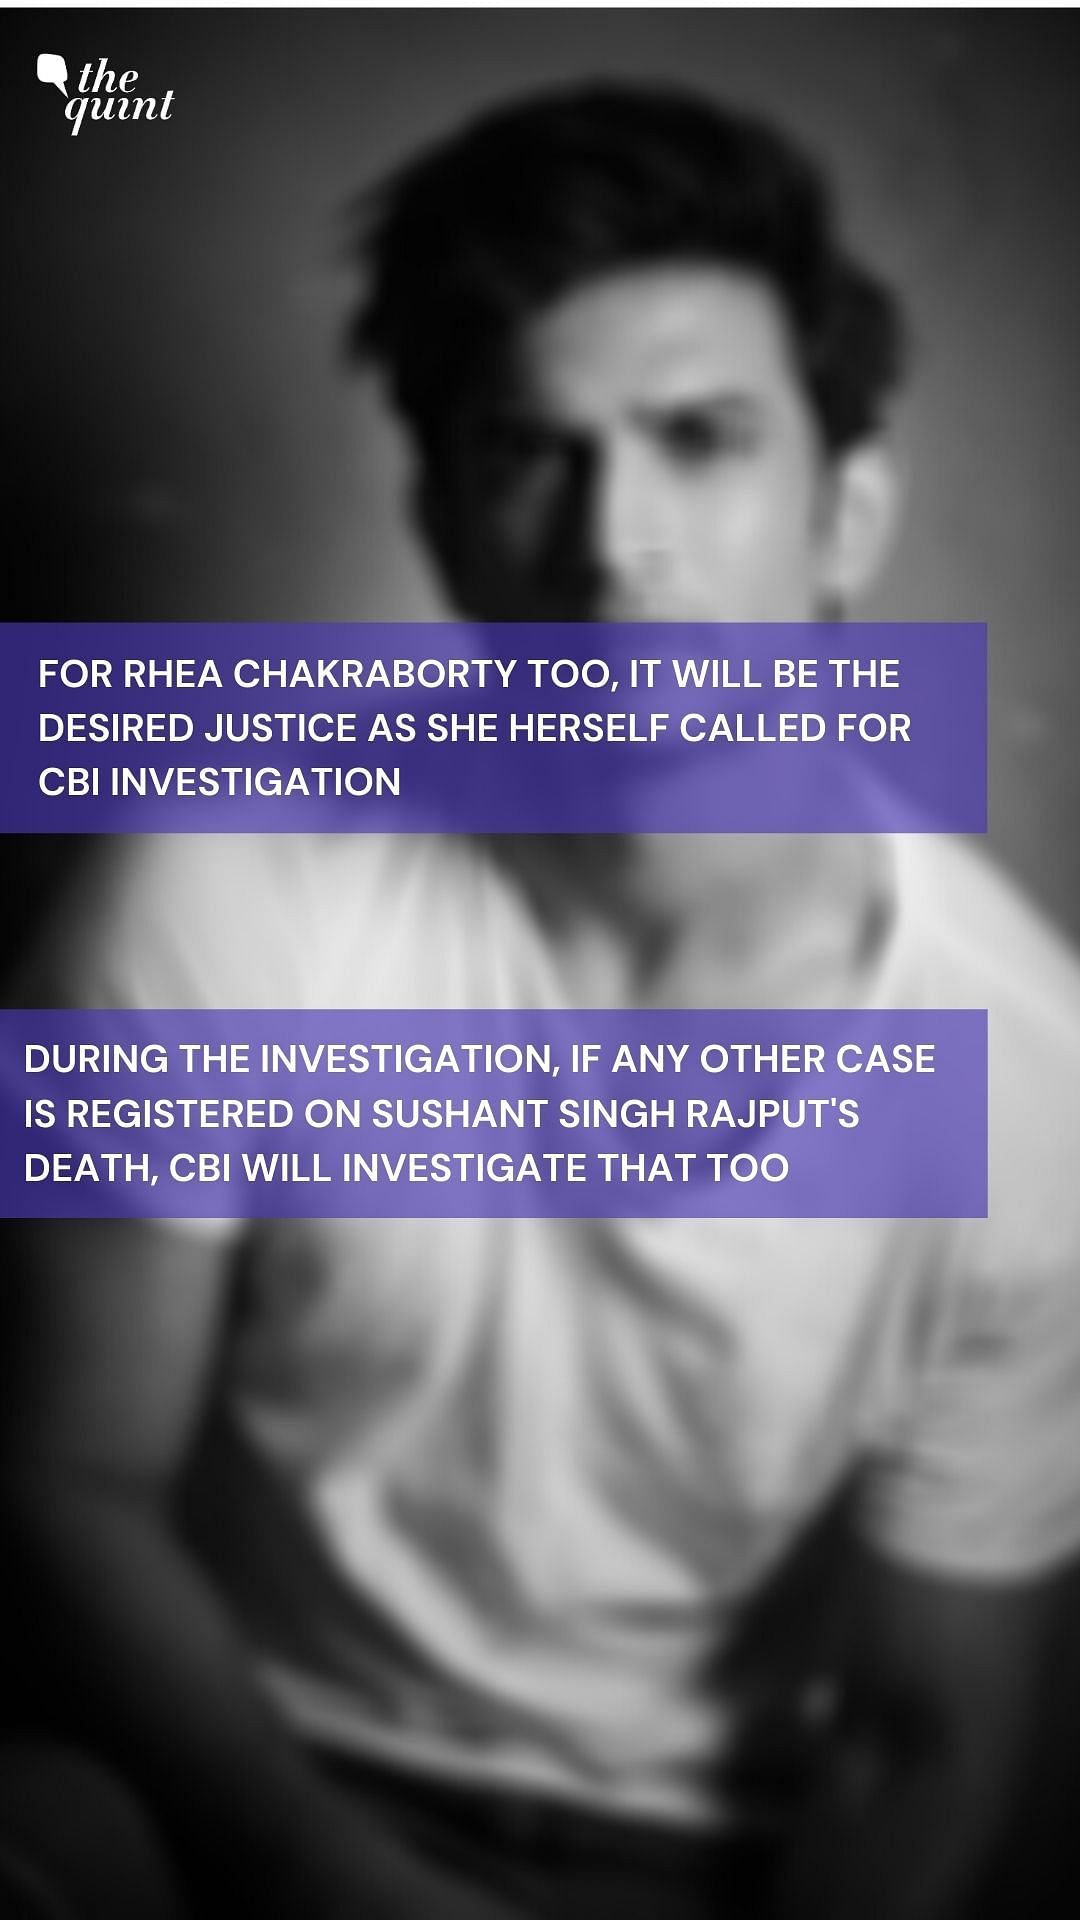 The Supreme Court has handed over the Sushant Singh Rajput case to the CBI.  